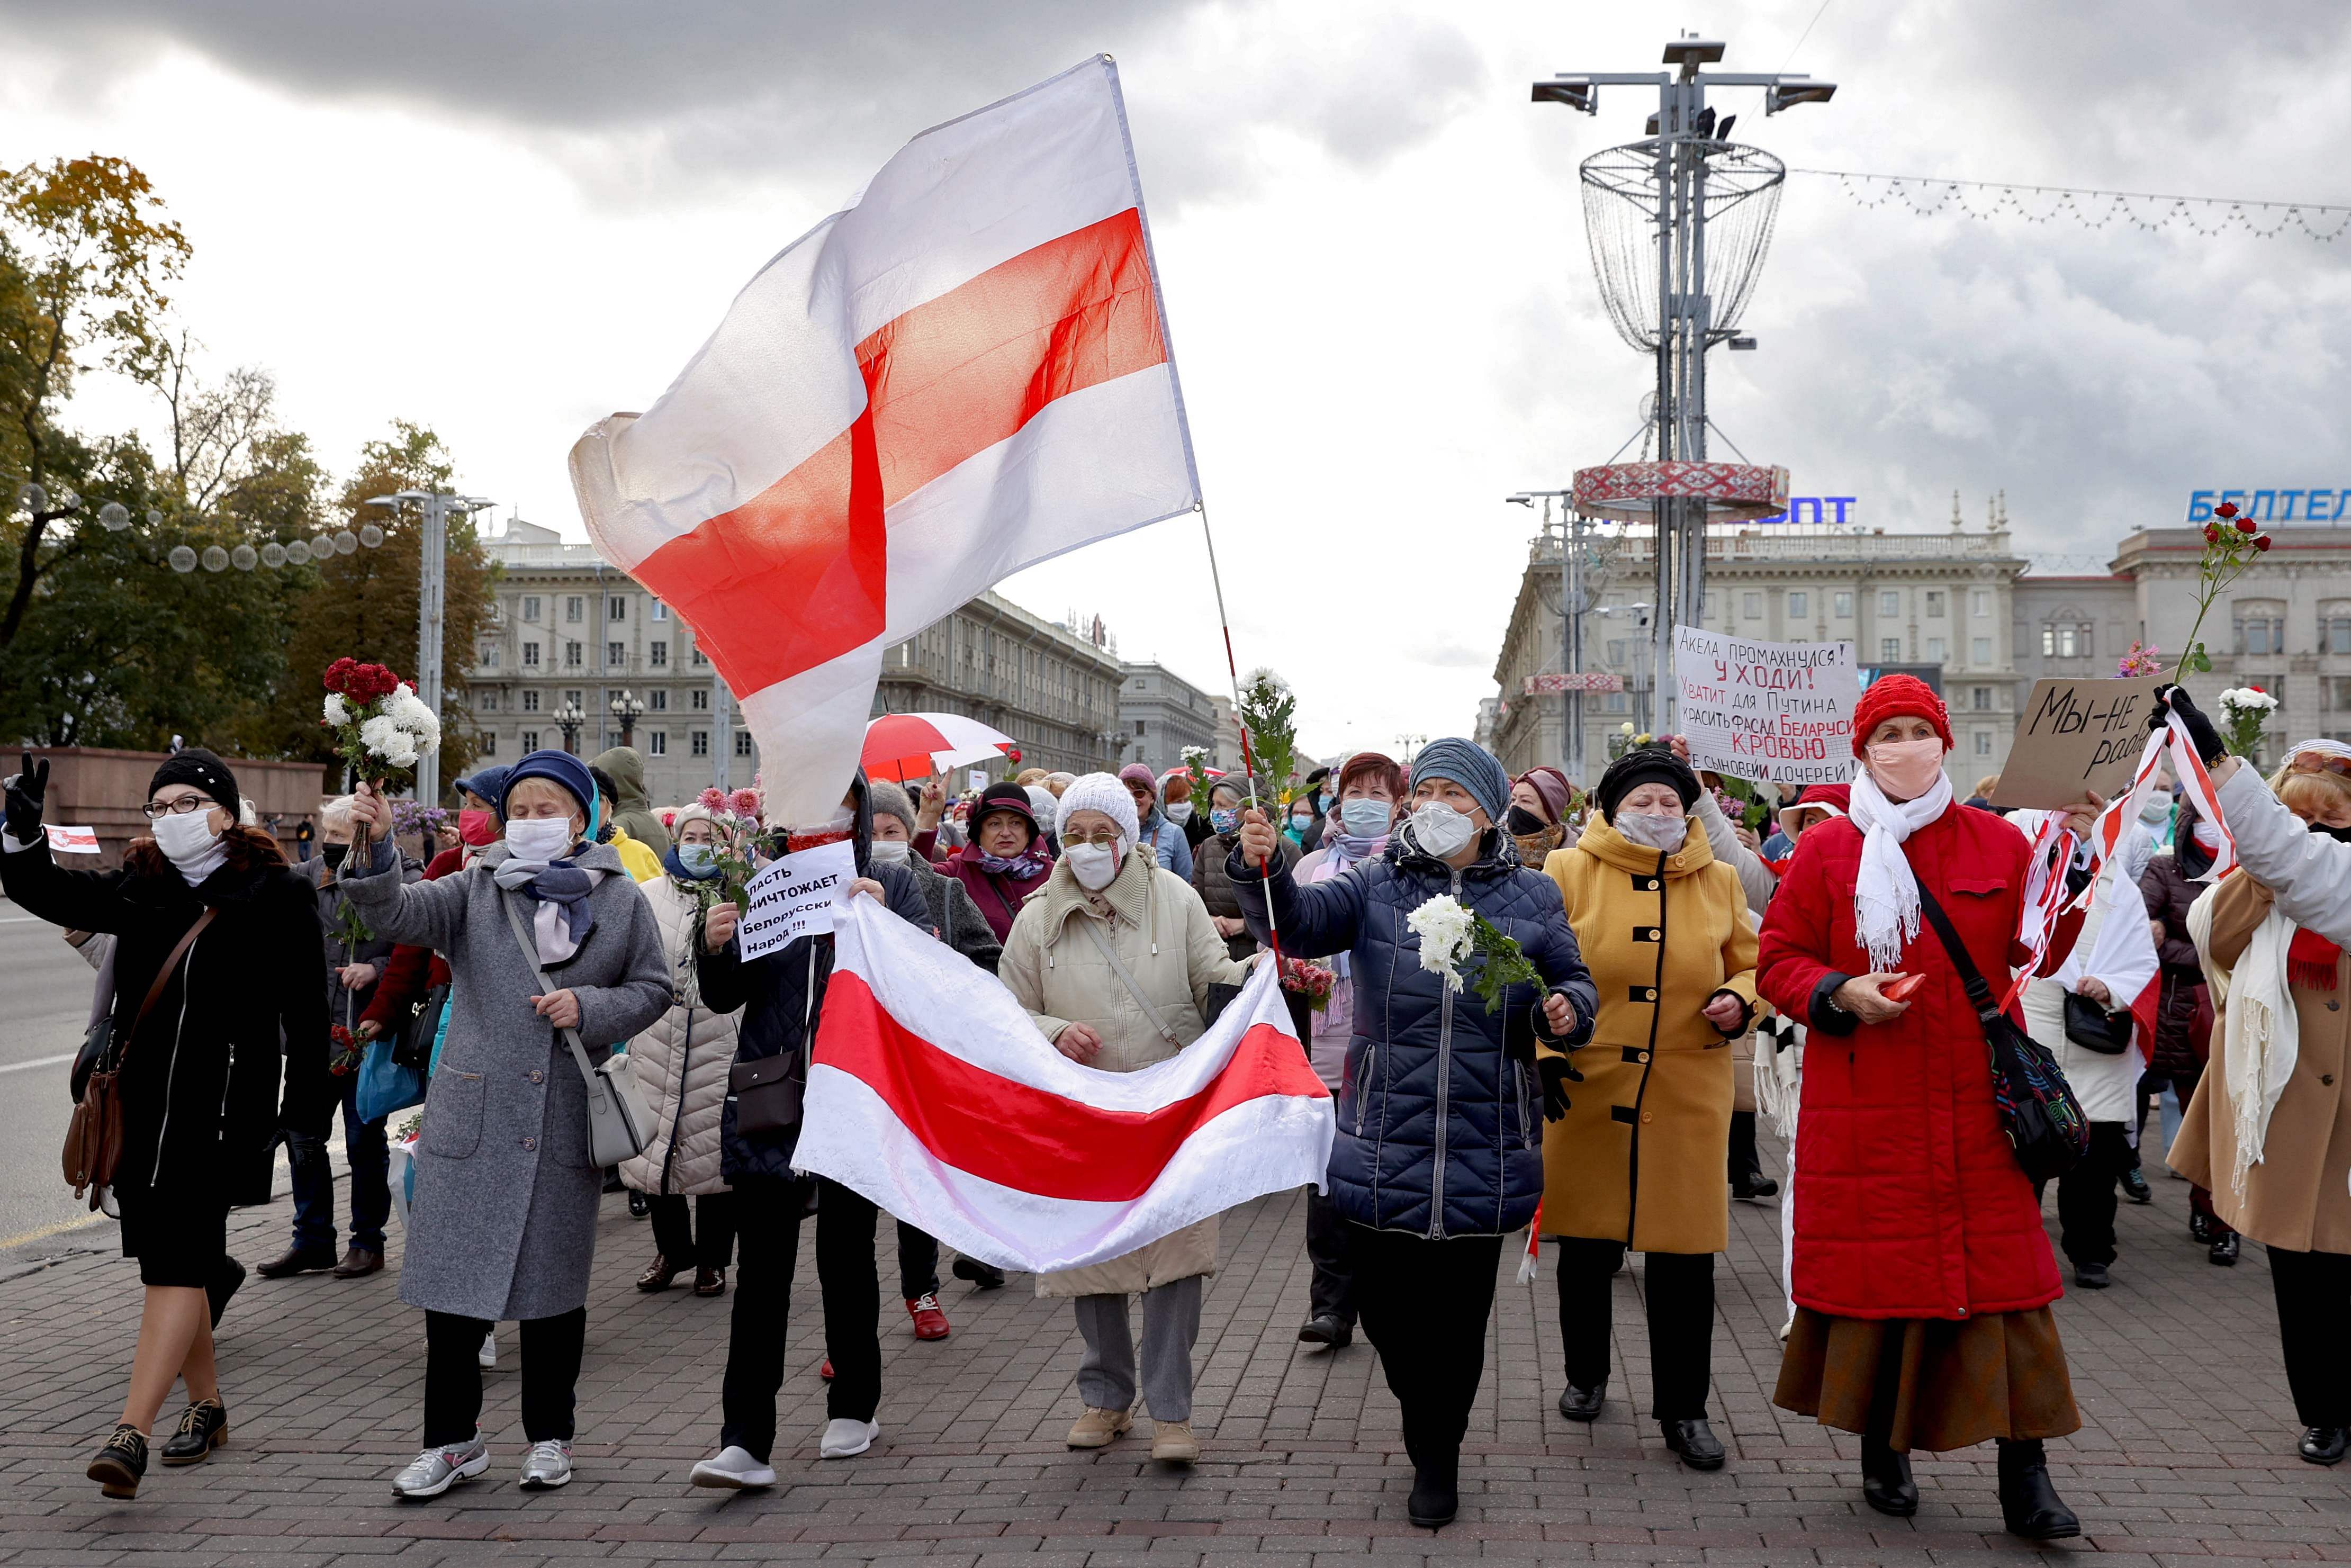 Belarusian pensioners carrying former white-red-white flags of Belarus and flowers parade through the streets during a rally to demand the resignation of authoritarian leader and new fair election. Credits: AFP Photo